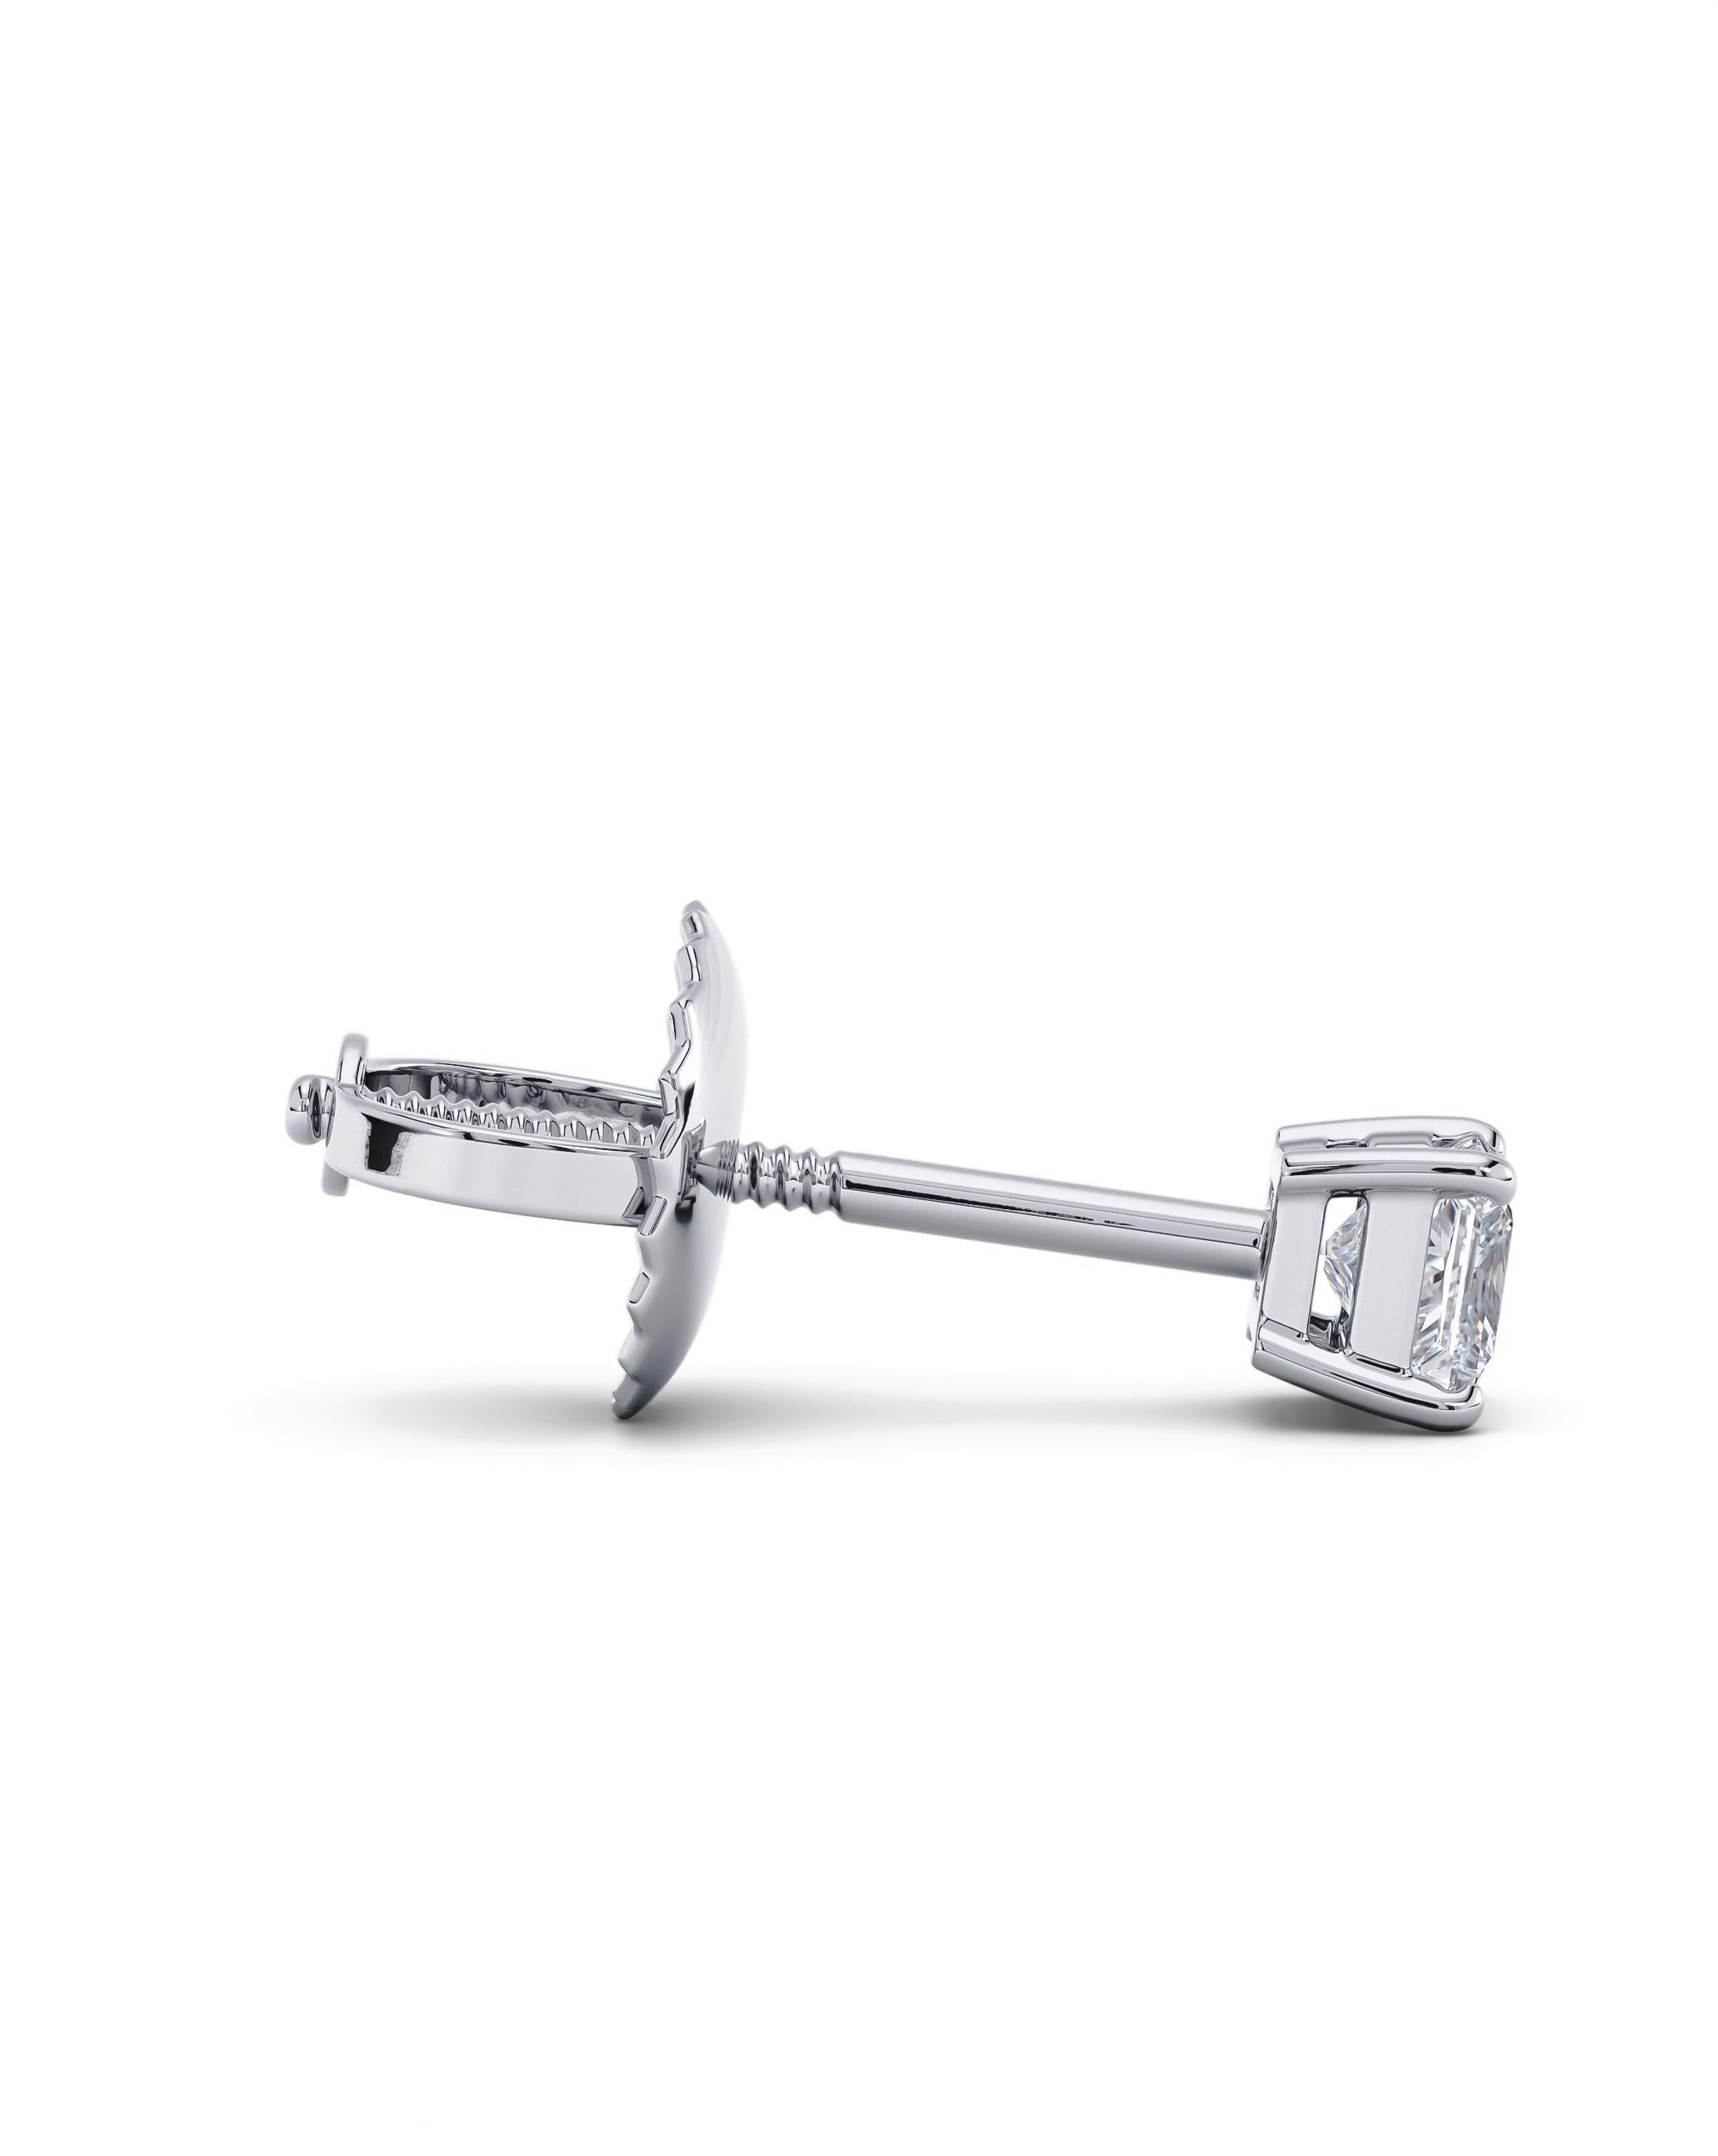 1/2 Carat Total Diamond Weight Princess Cut Studs
Radiate elegance with these princess cut studs showcasing a stunning 1/2 carat total diamond weight. Their charm is unmatched.